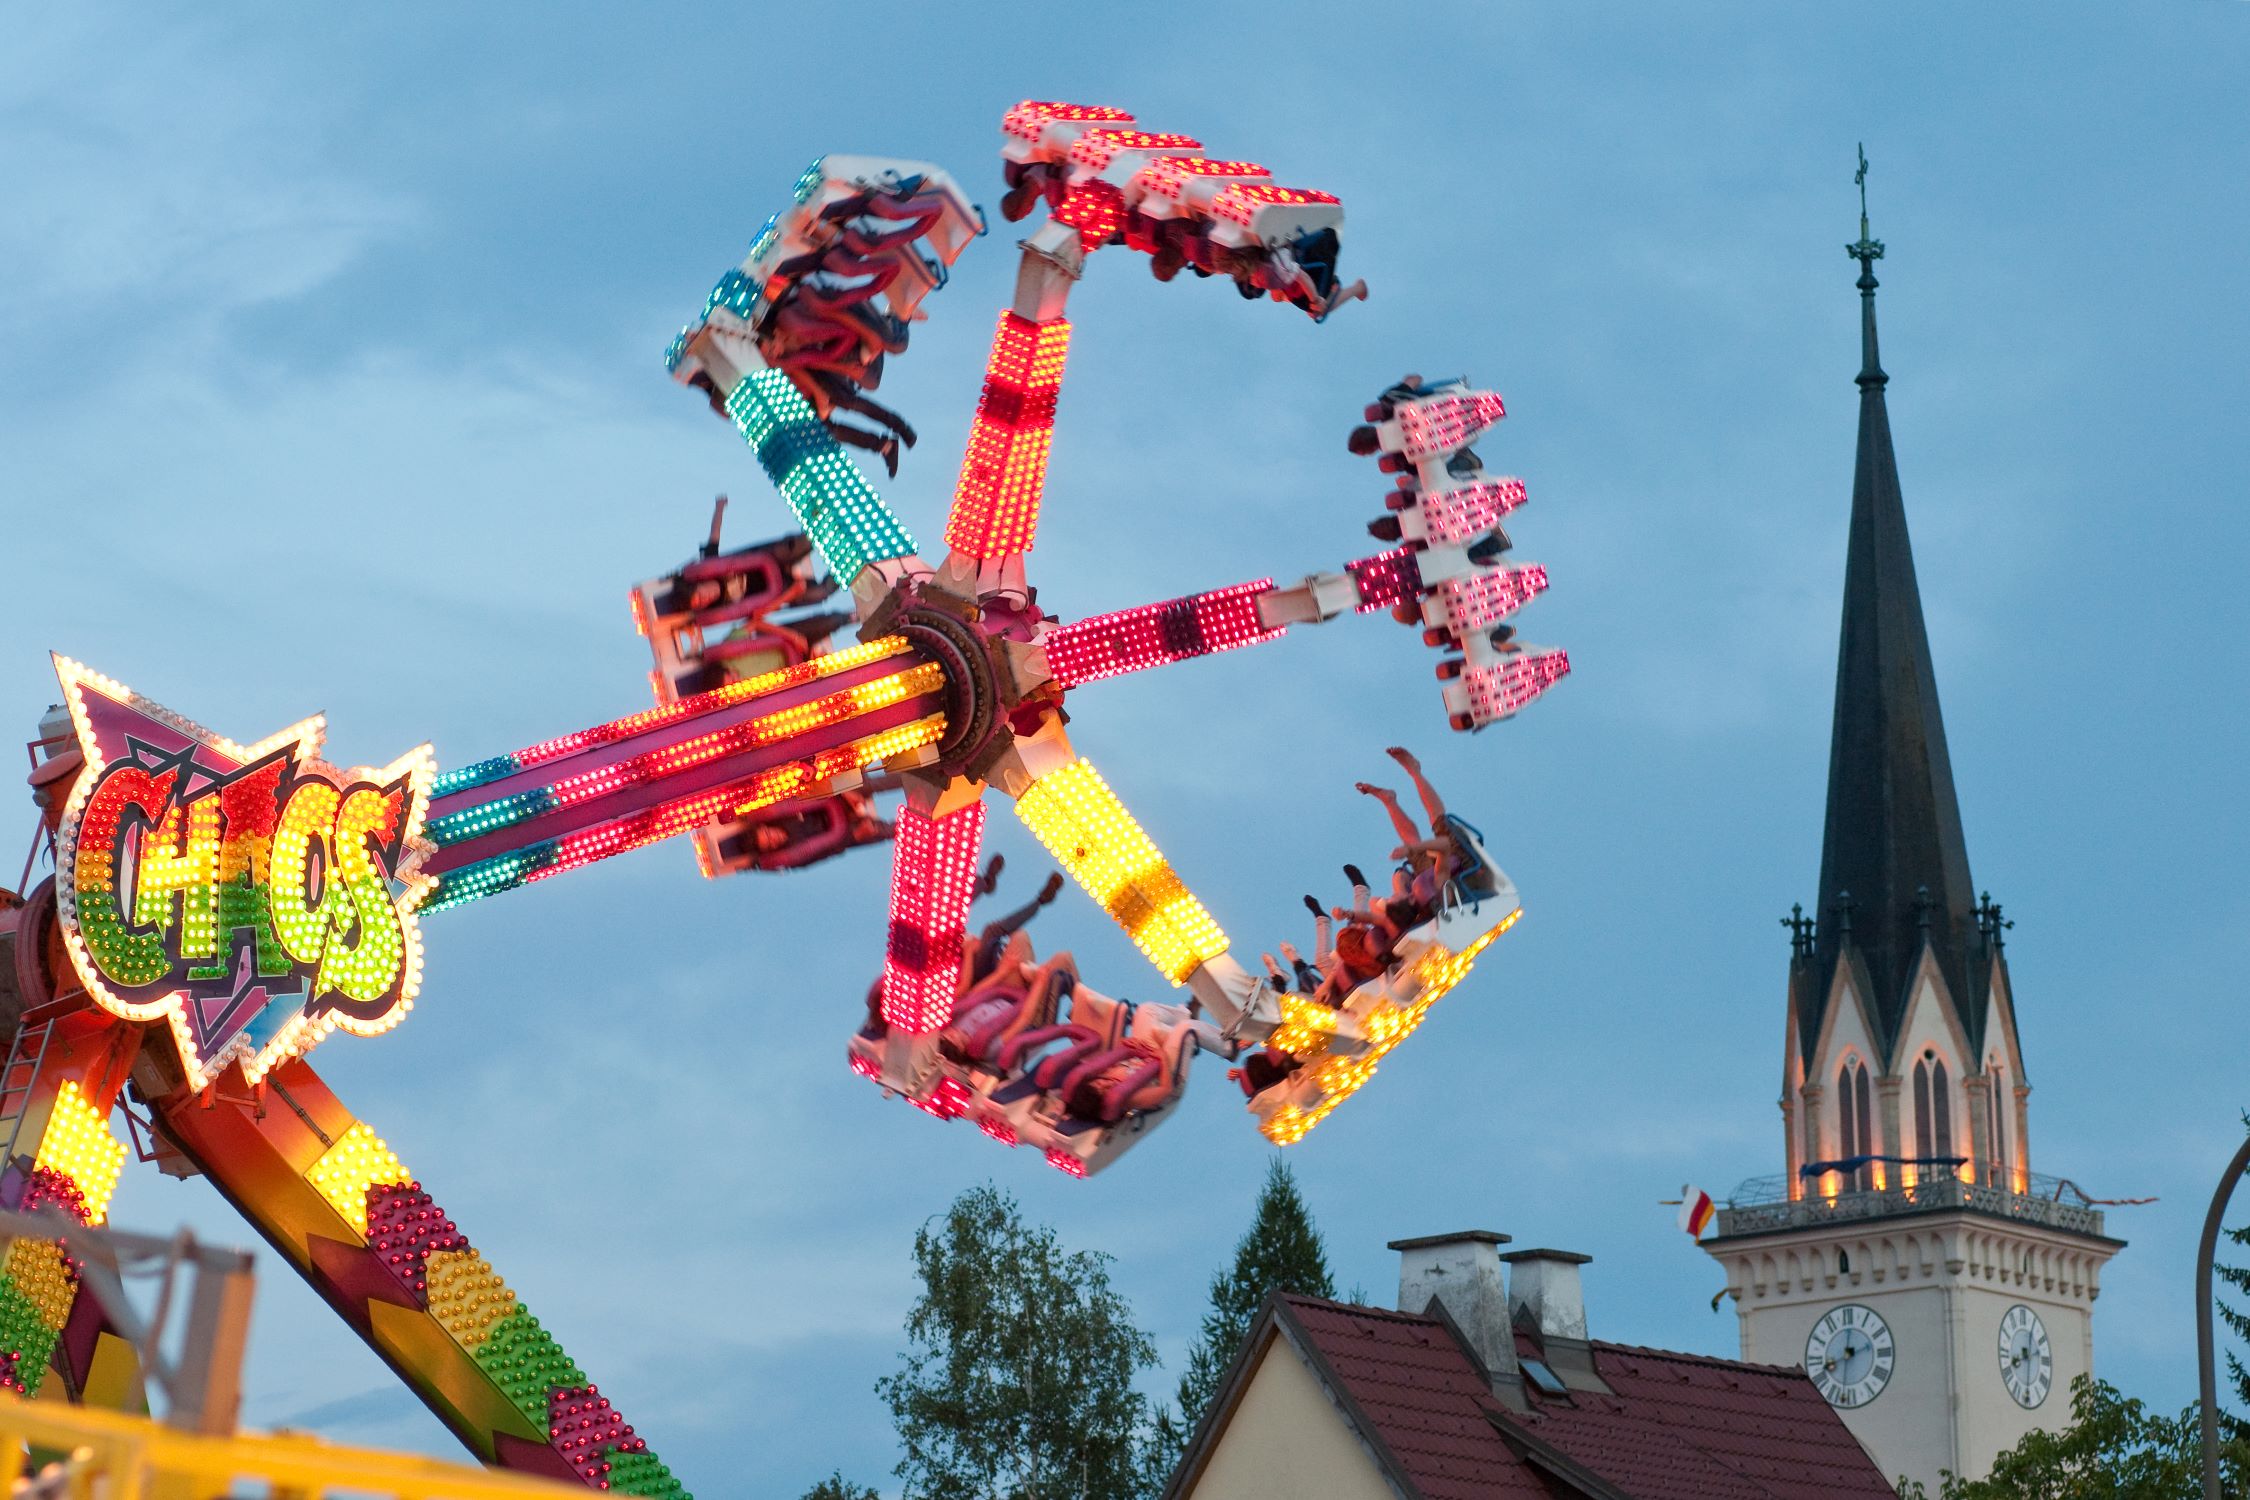 The fun park during Kirchtag's week